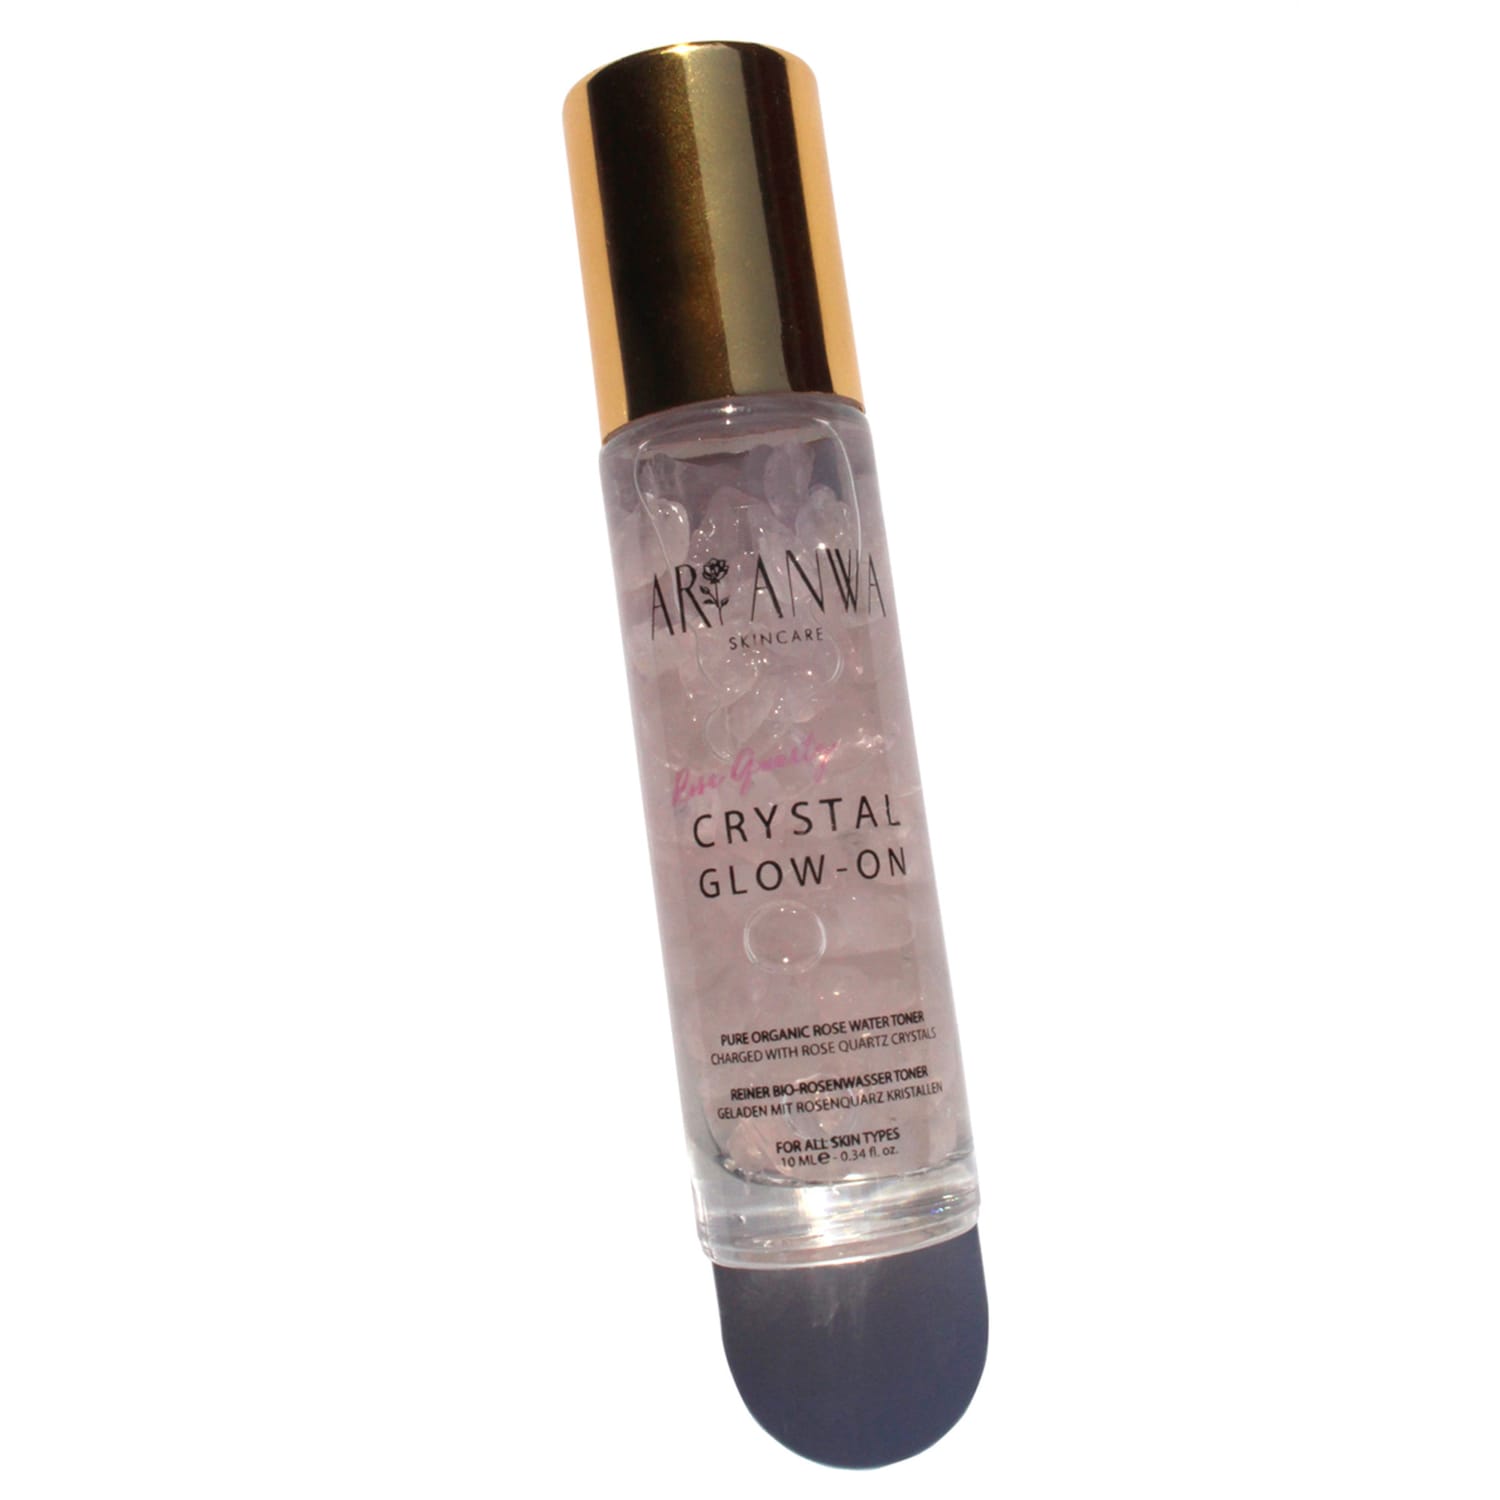 ARI ANWA Skincare Cooling roll-on with rose quartz and rose water - Crystal Glow On